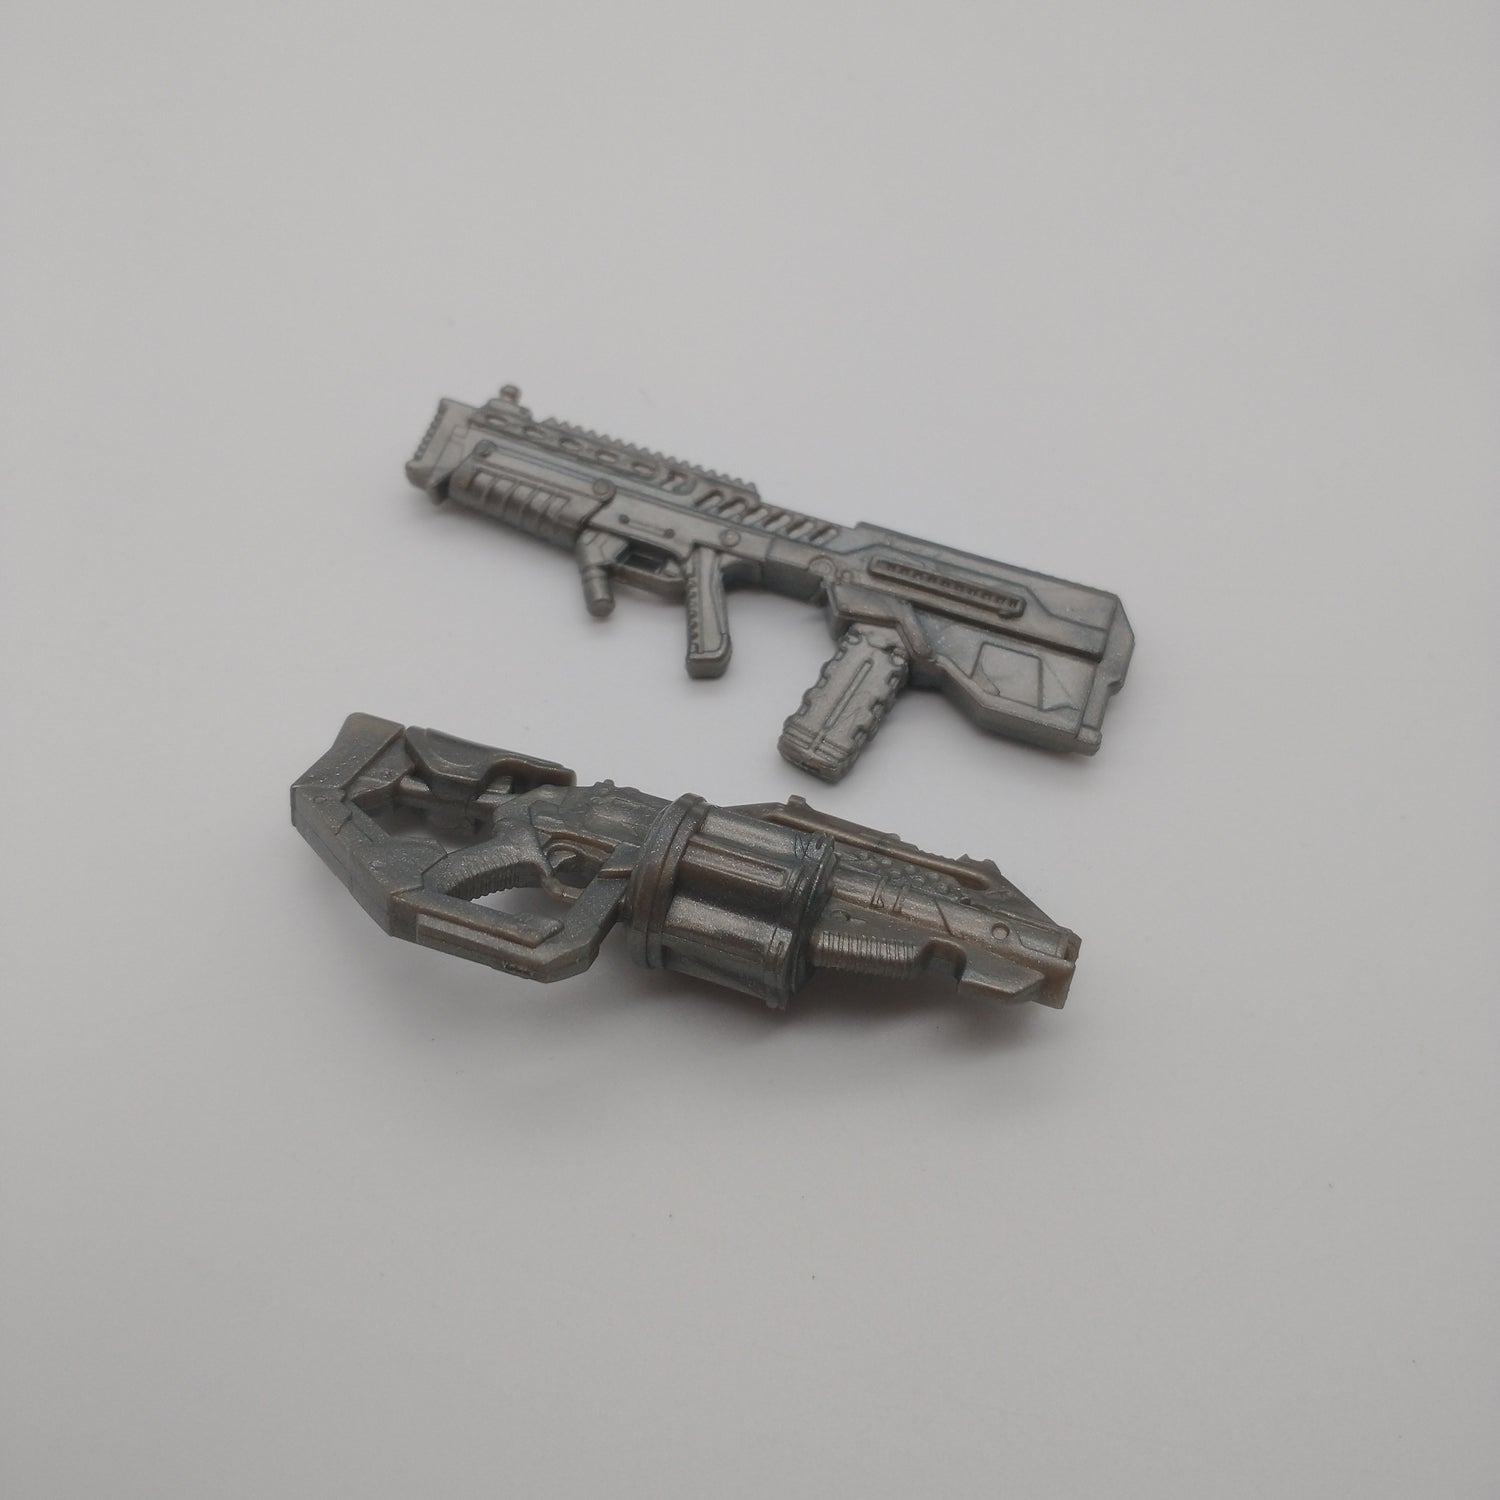 A close up of two silver guns